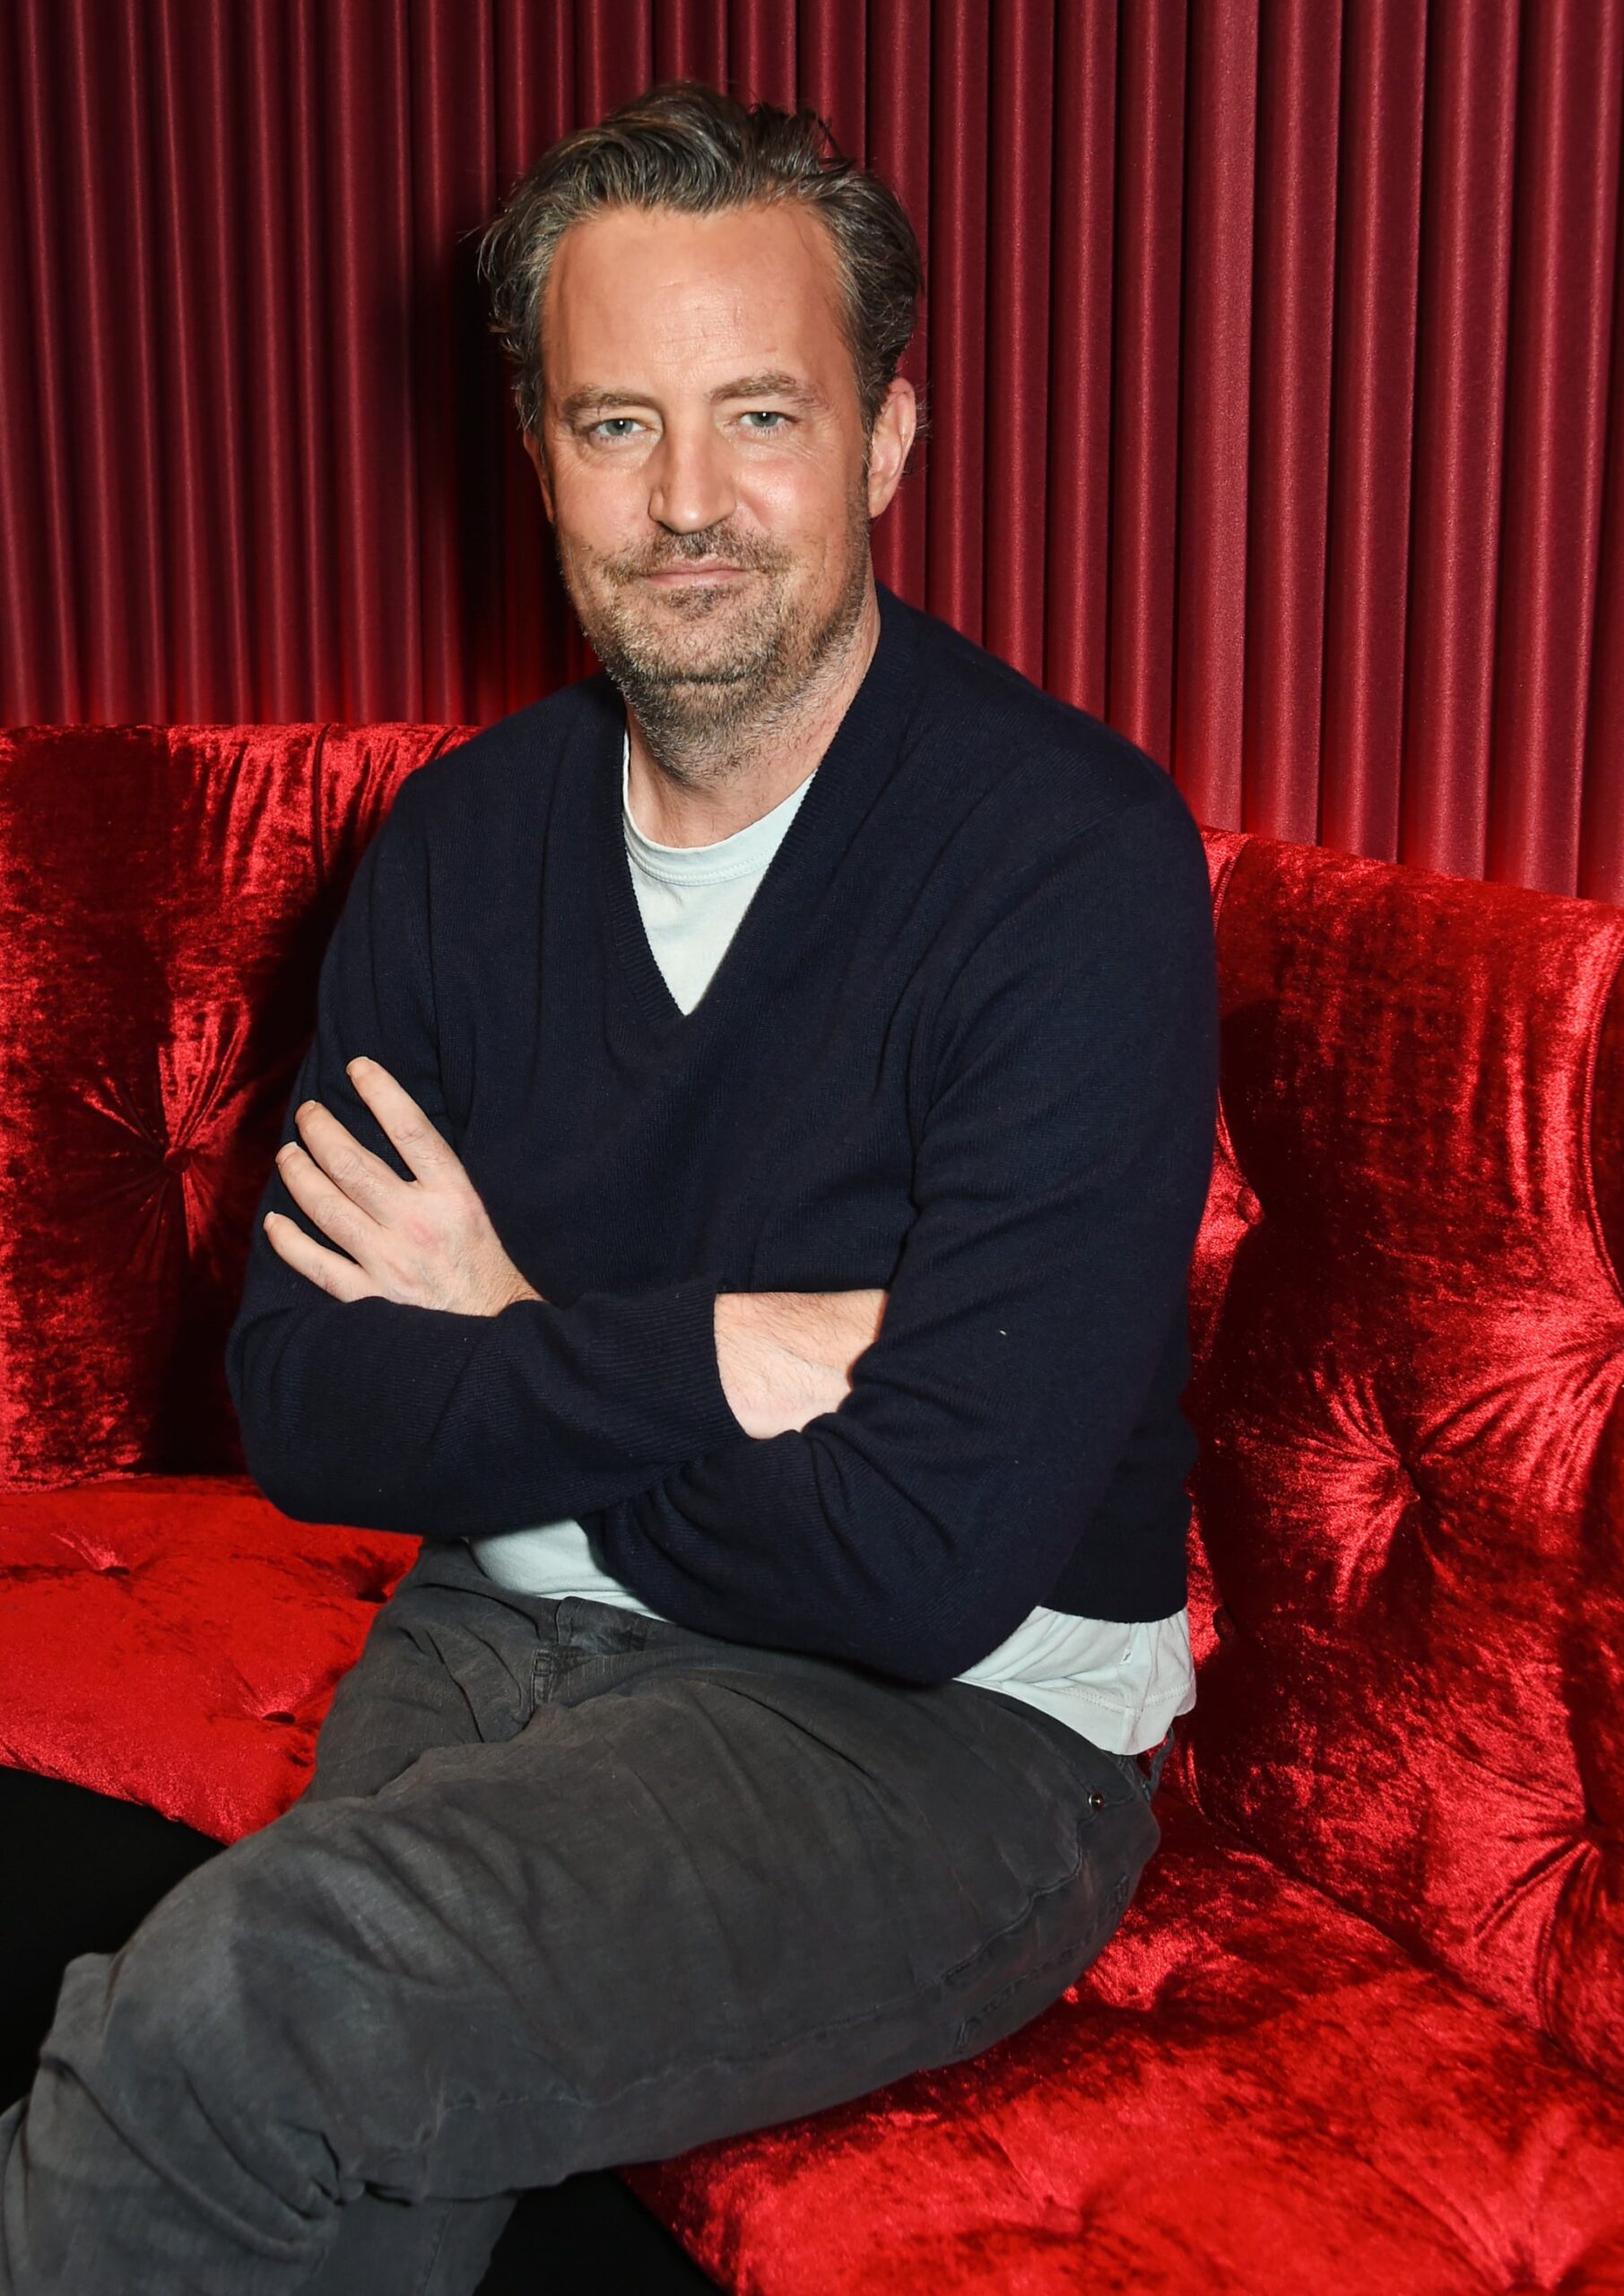 “Friends” Actor Matthew Perry Opens Up About Addiction and Recovery in New Memoir